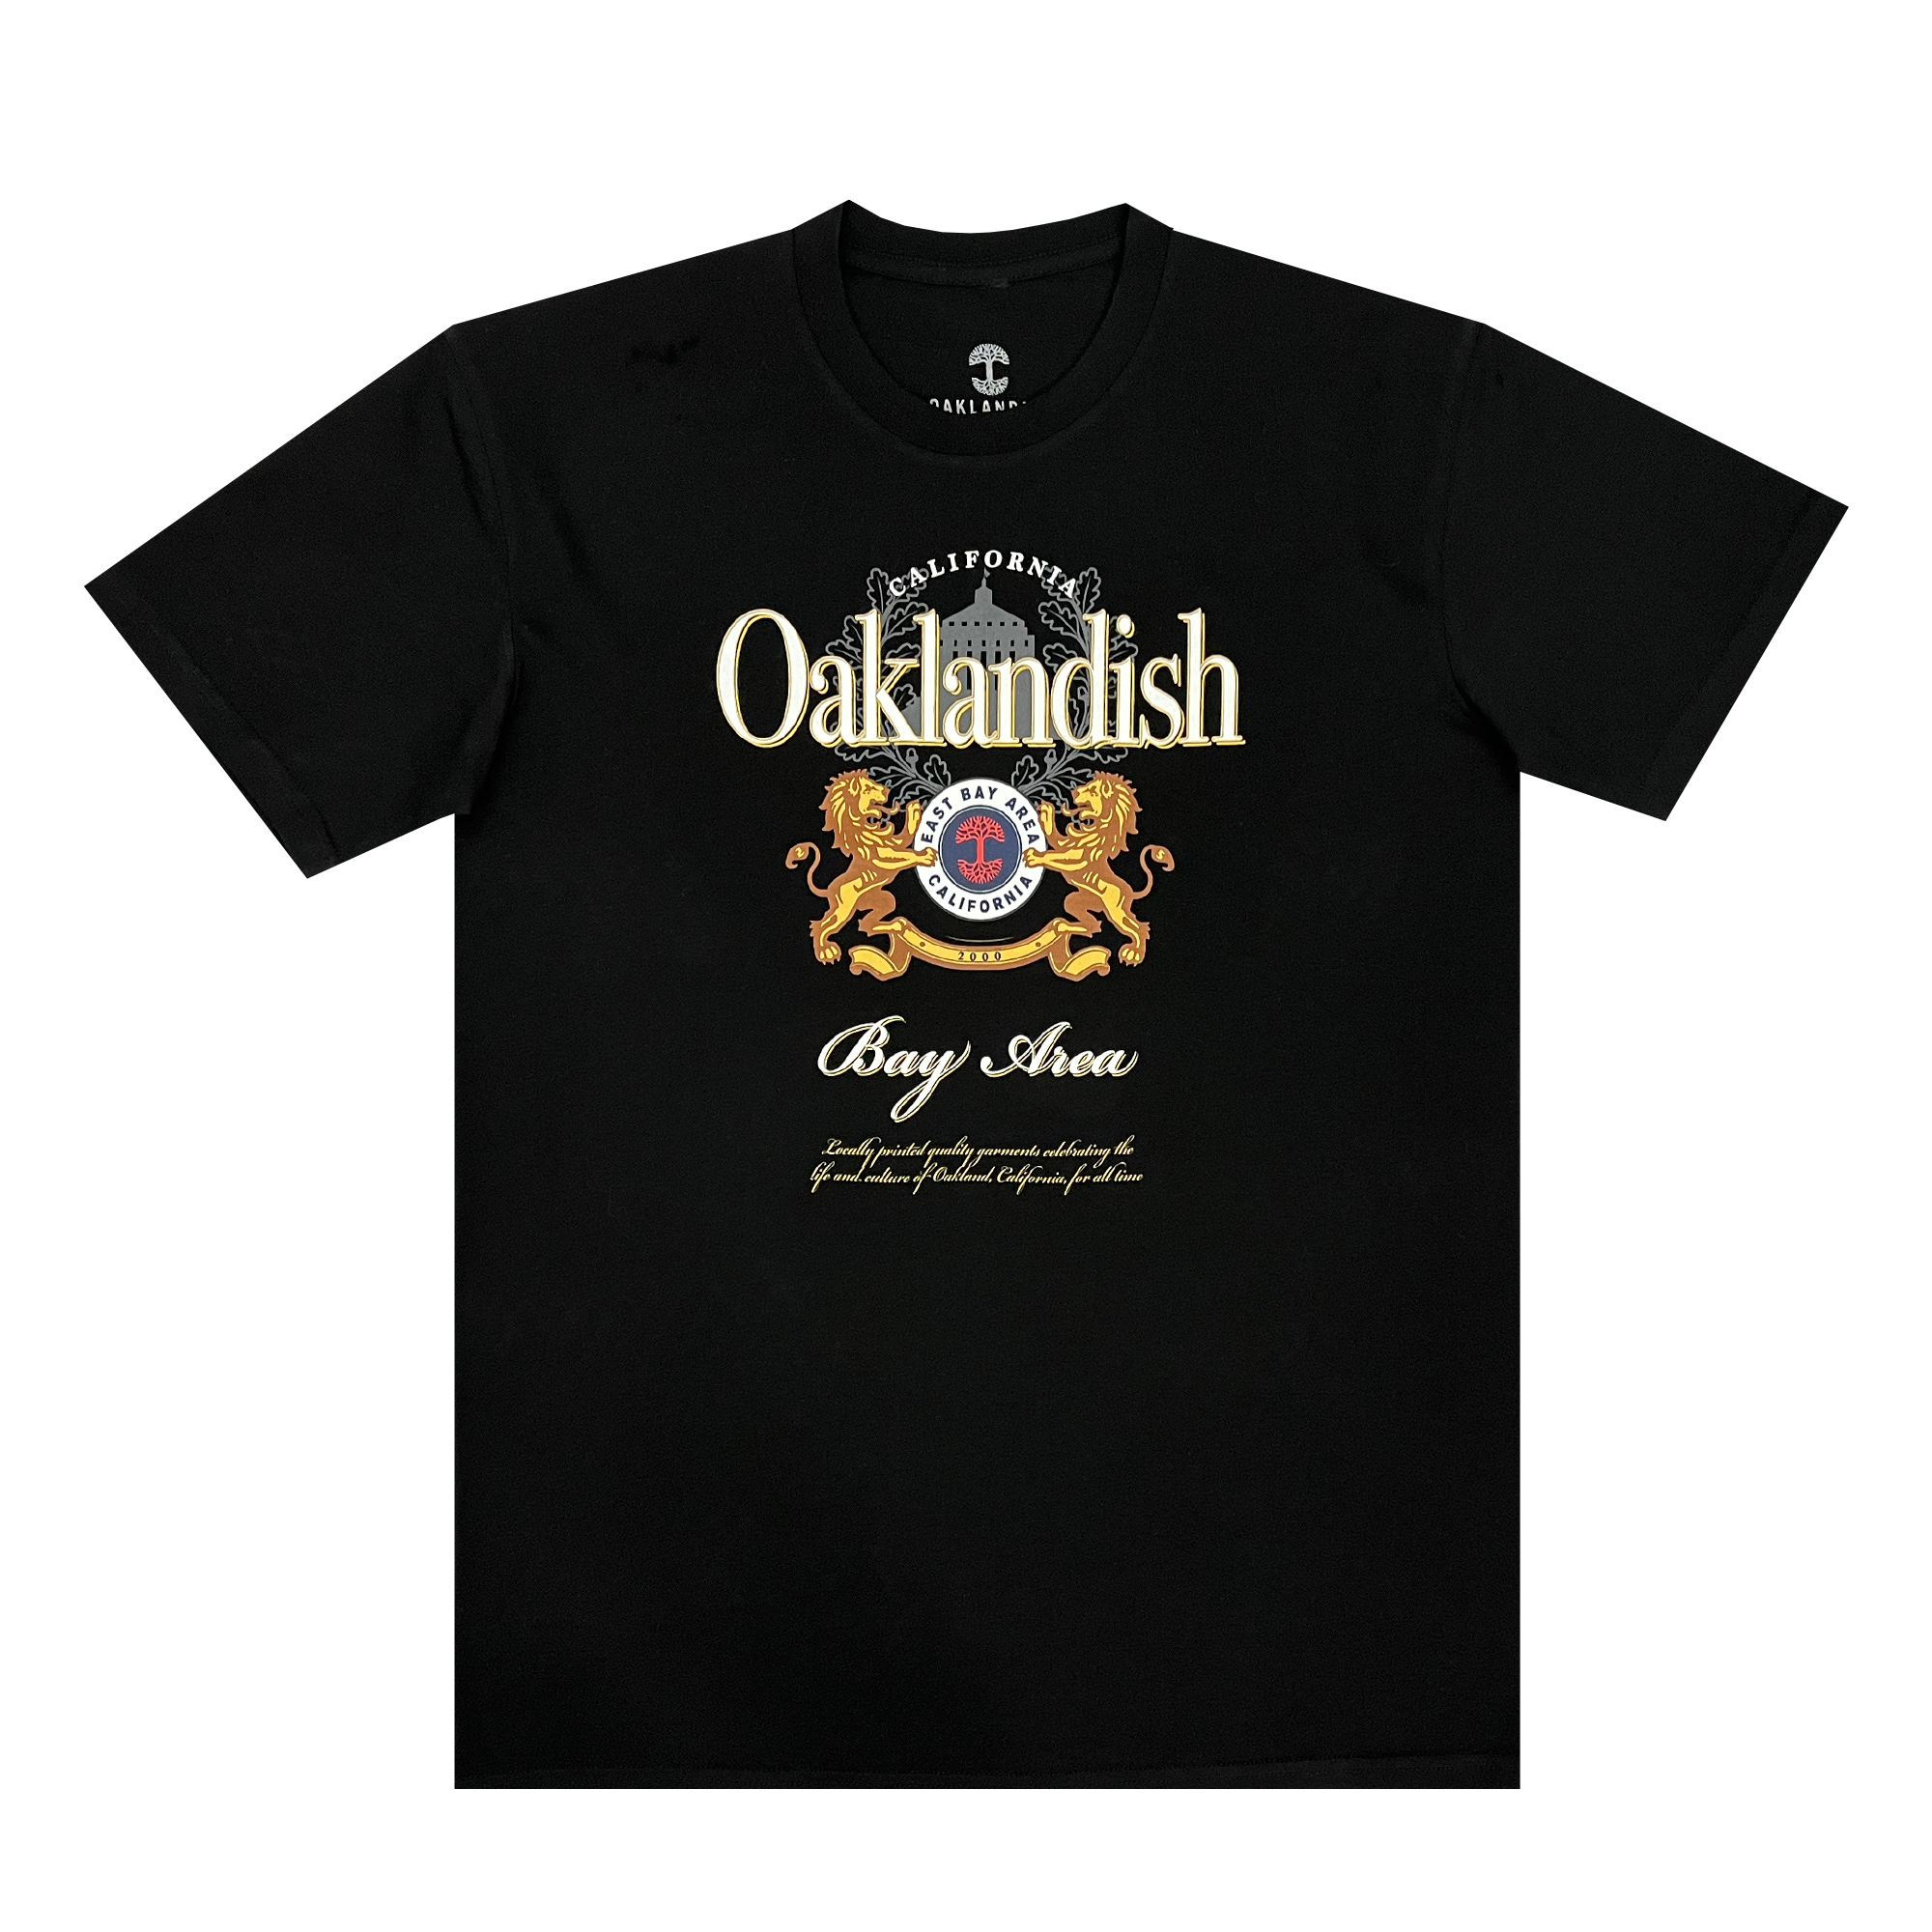 Front view of a black t-shirt with Lager Negra logo made over with a Bay Area, Oaklandish, California styling.